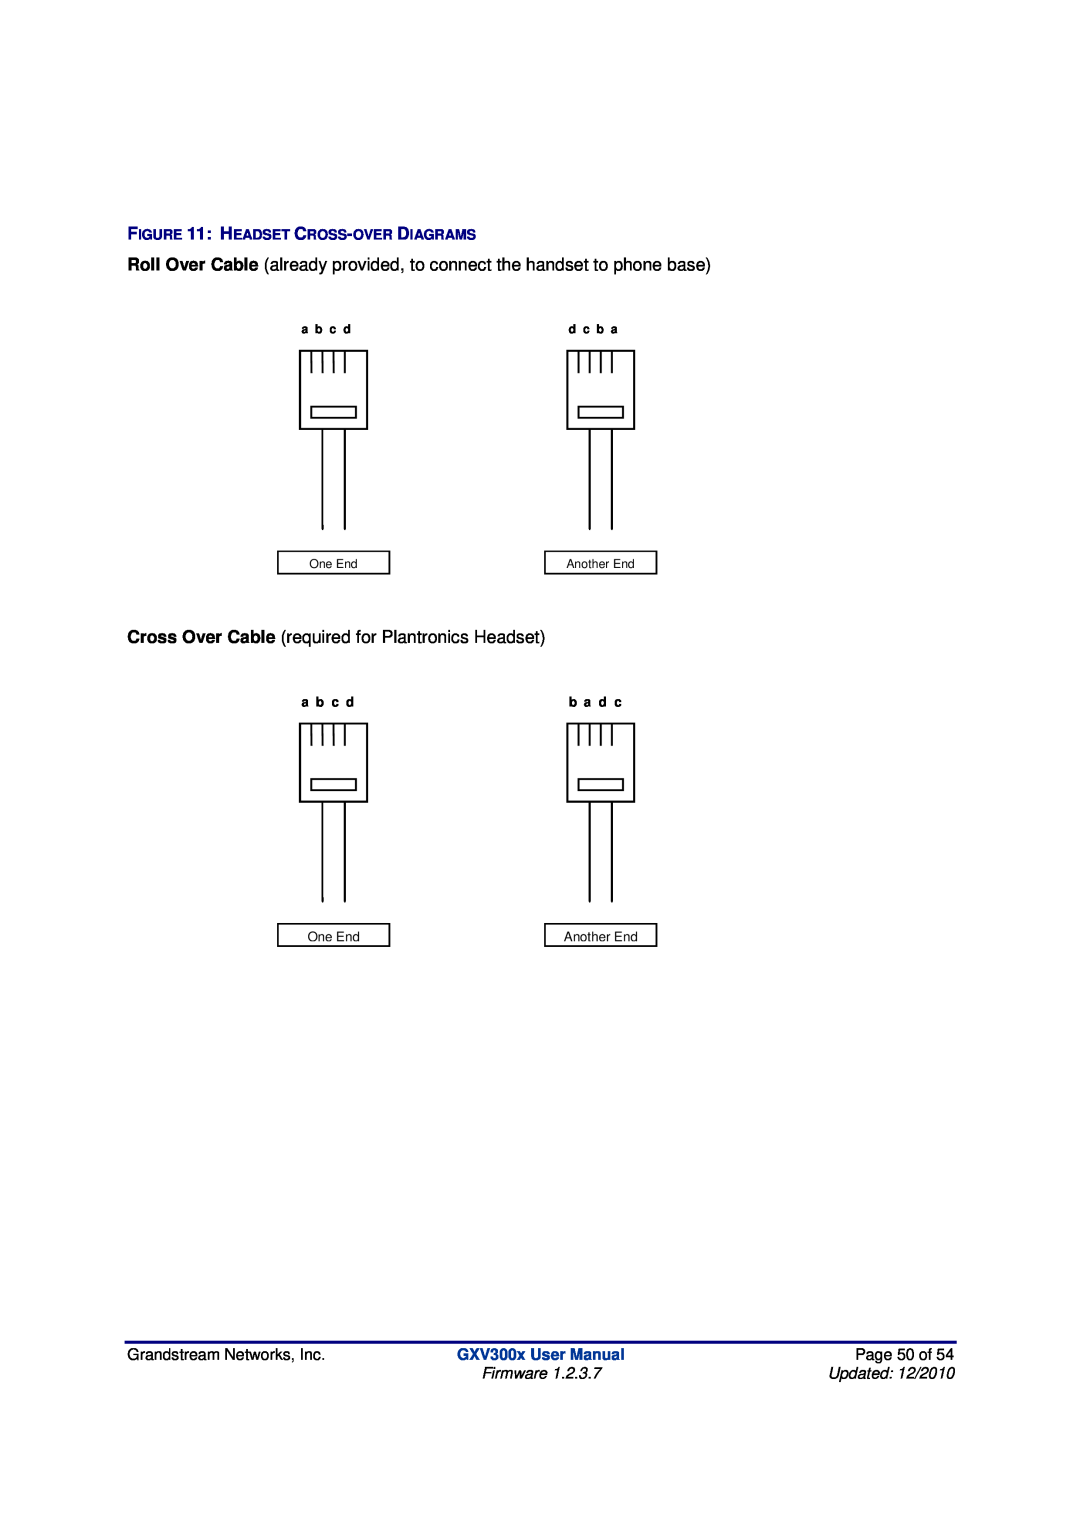 Grandstream Networks GXV300X Grandstream Networks, Inc, Page 50 of, Firmware, Updated 12/2010, Headset Cross-Over Diagrams 